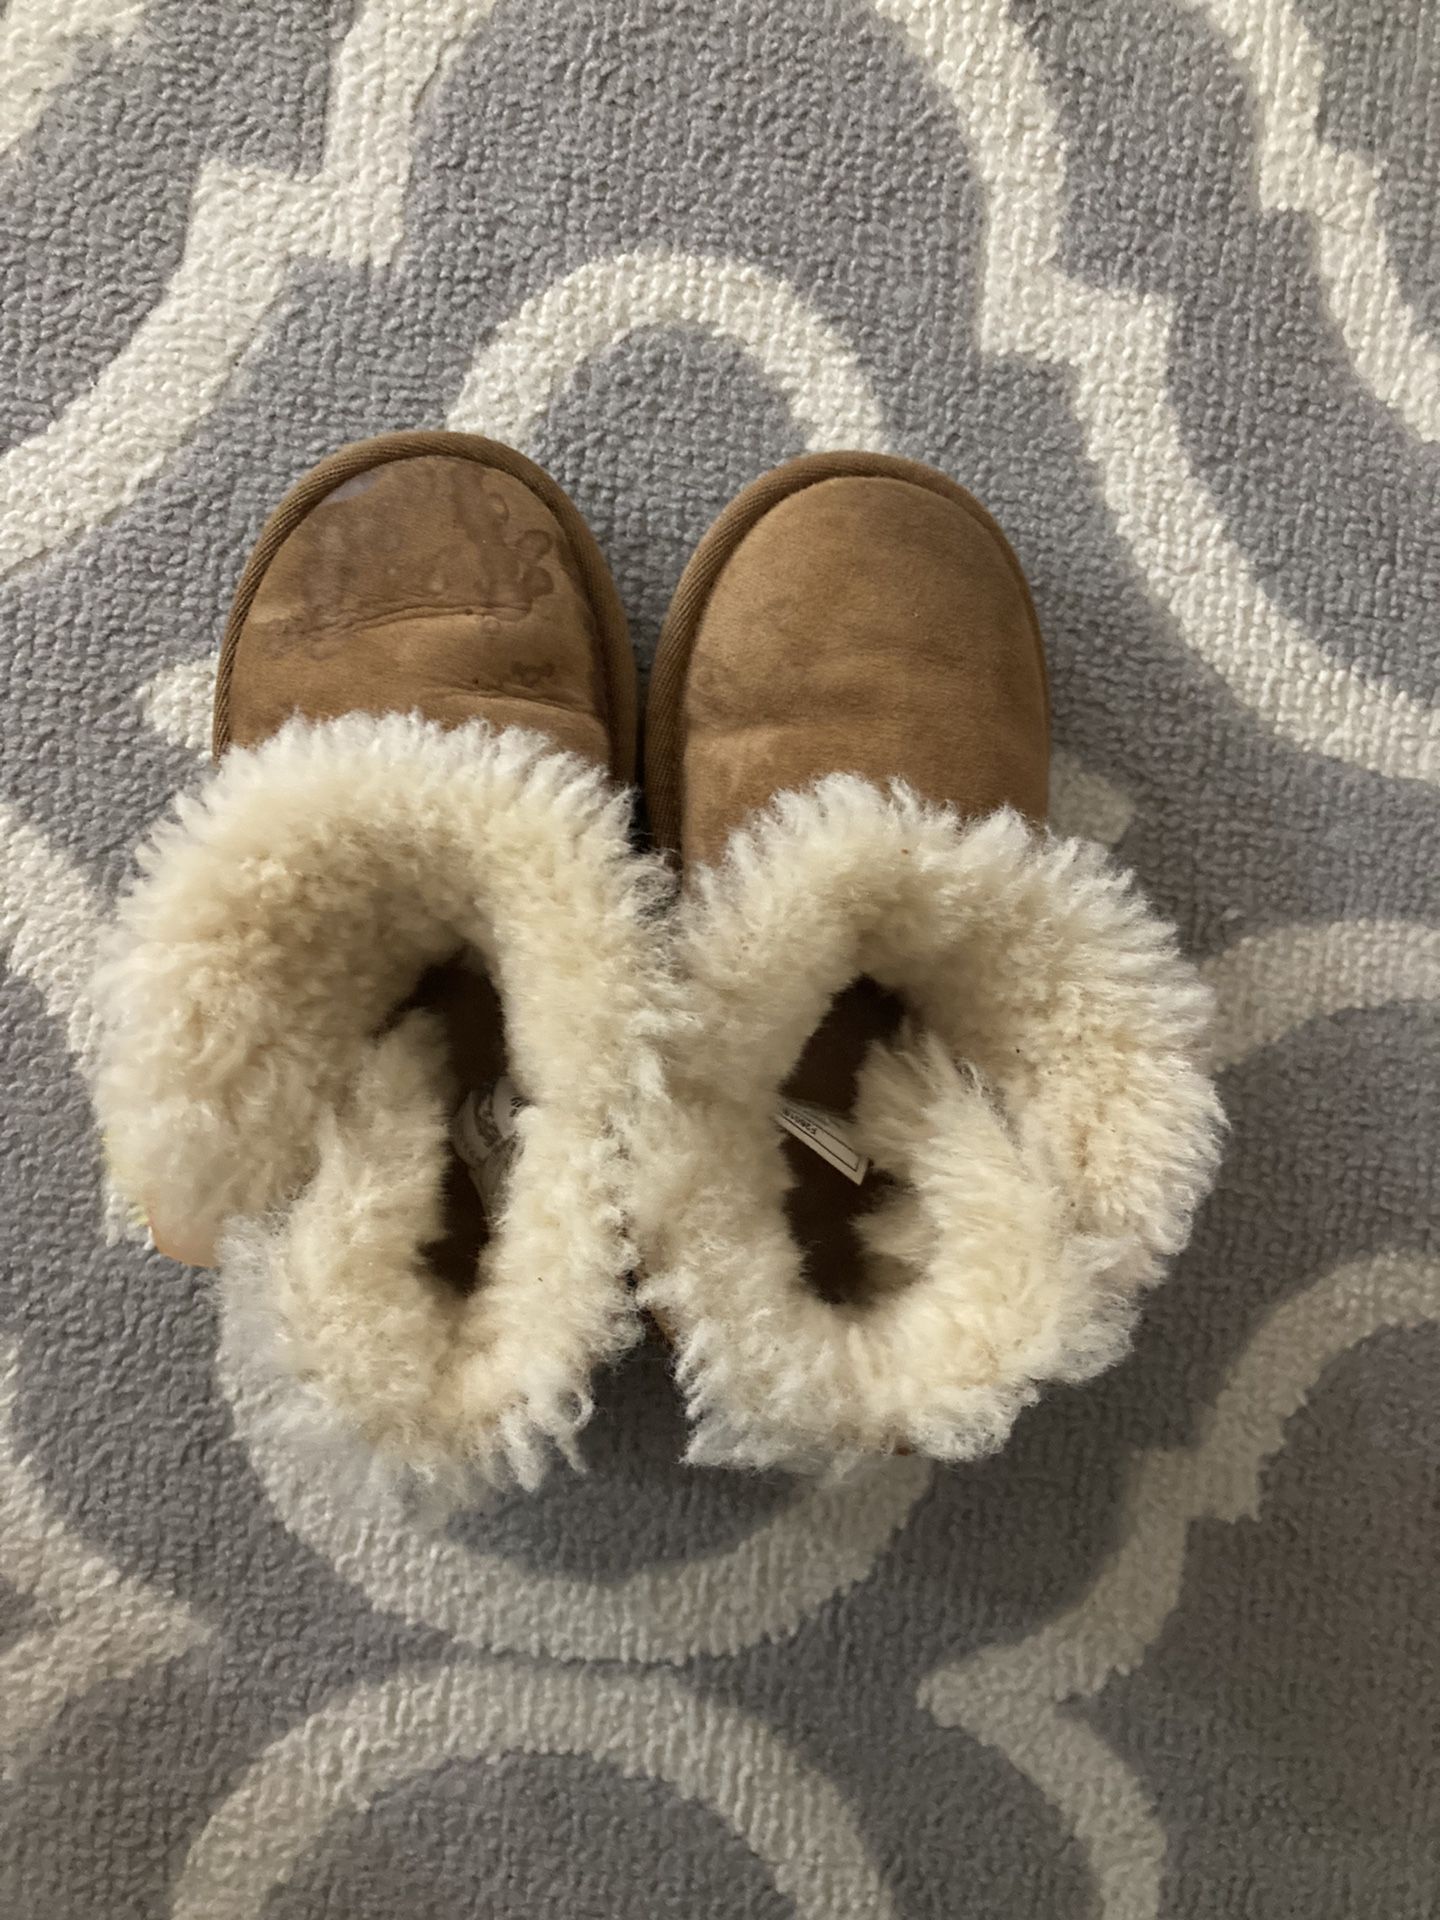 Uggs Boots Size 10 Toddler $40 Obo 